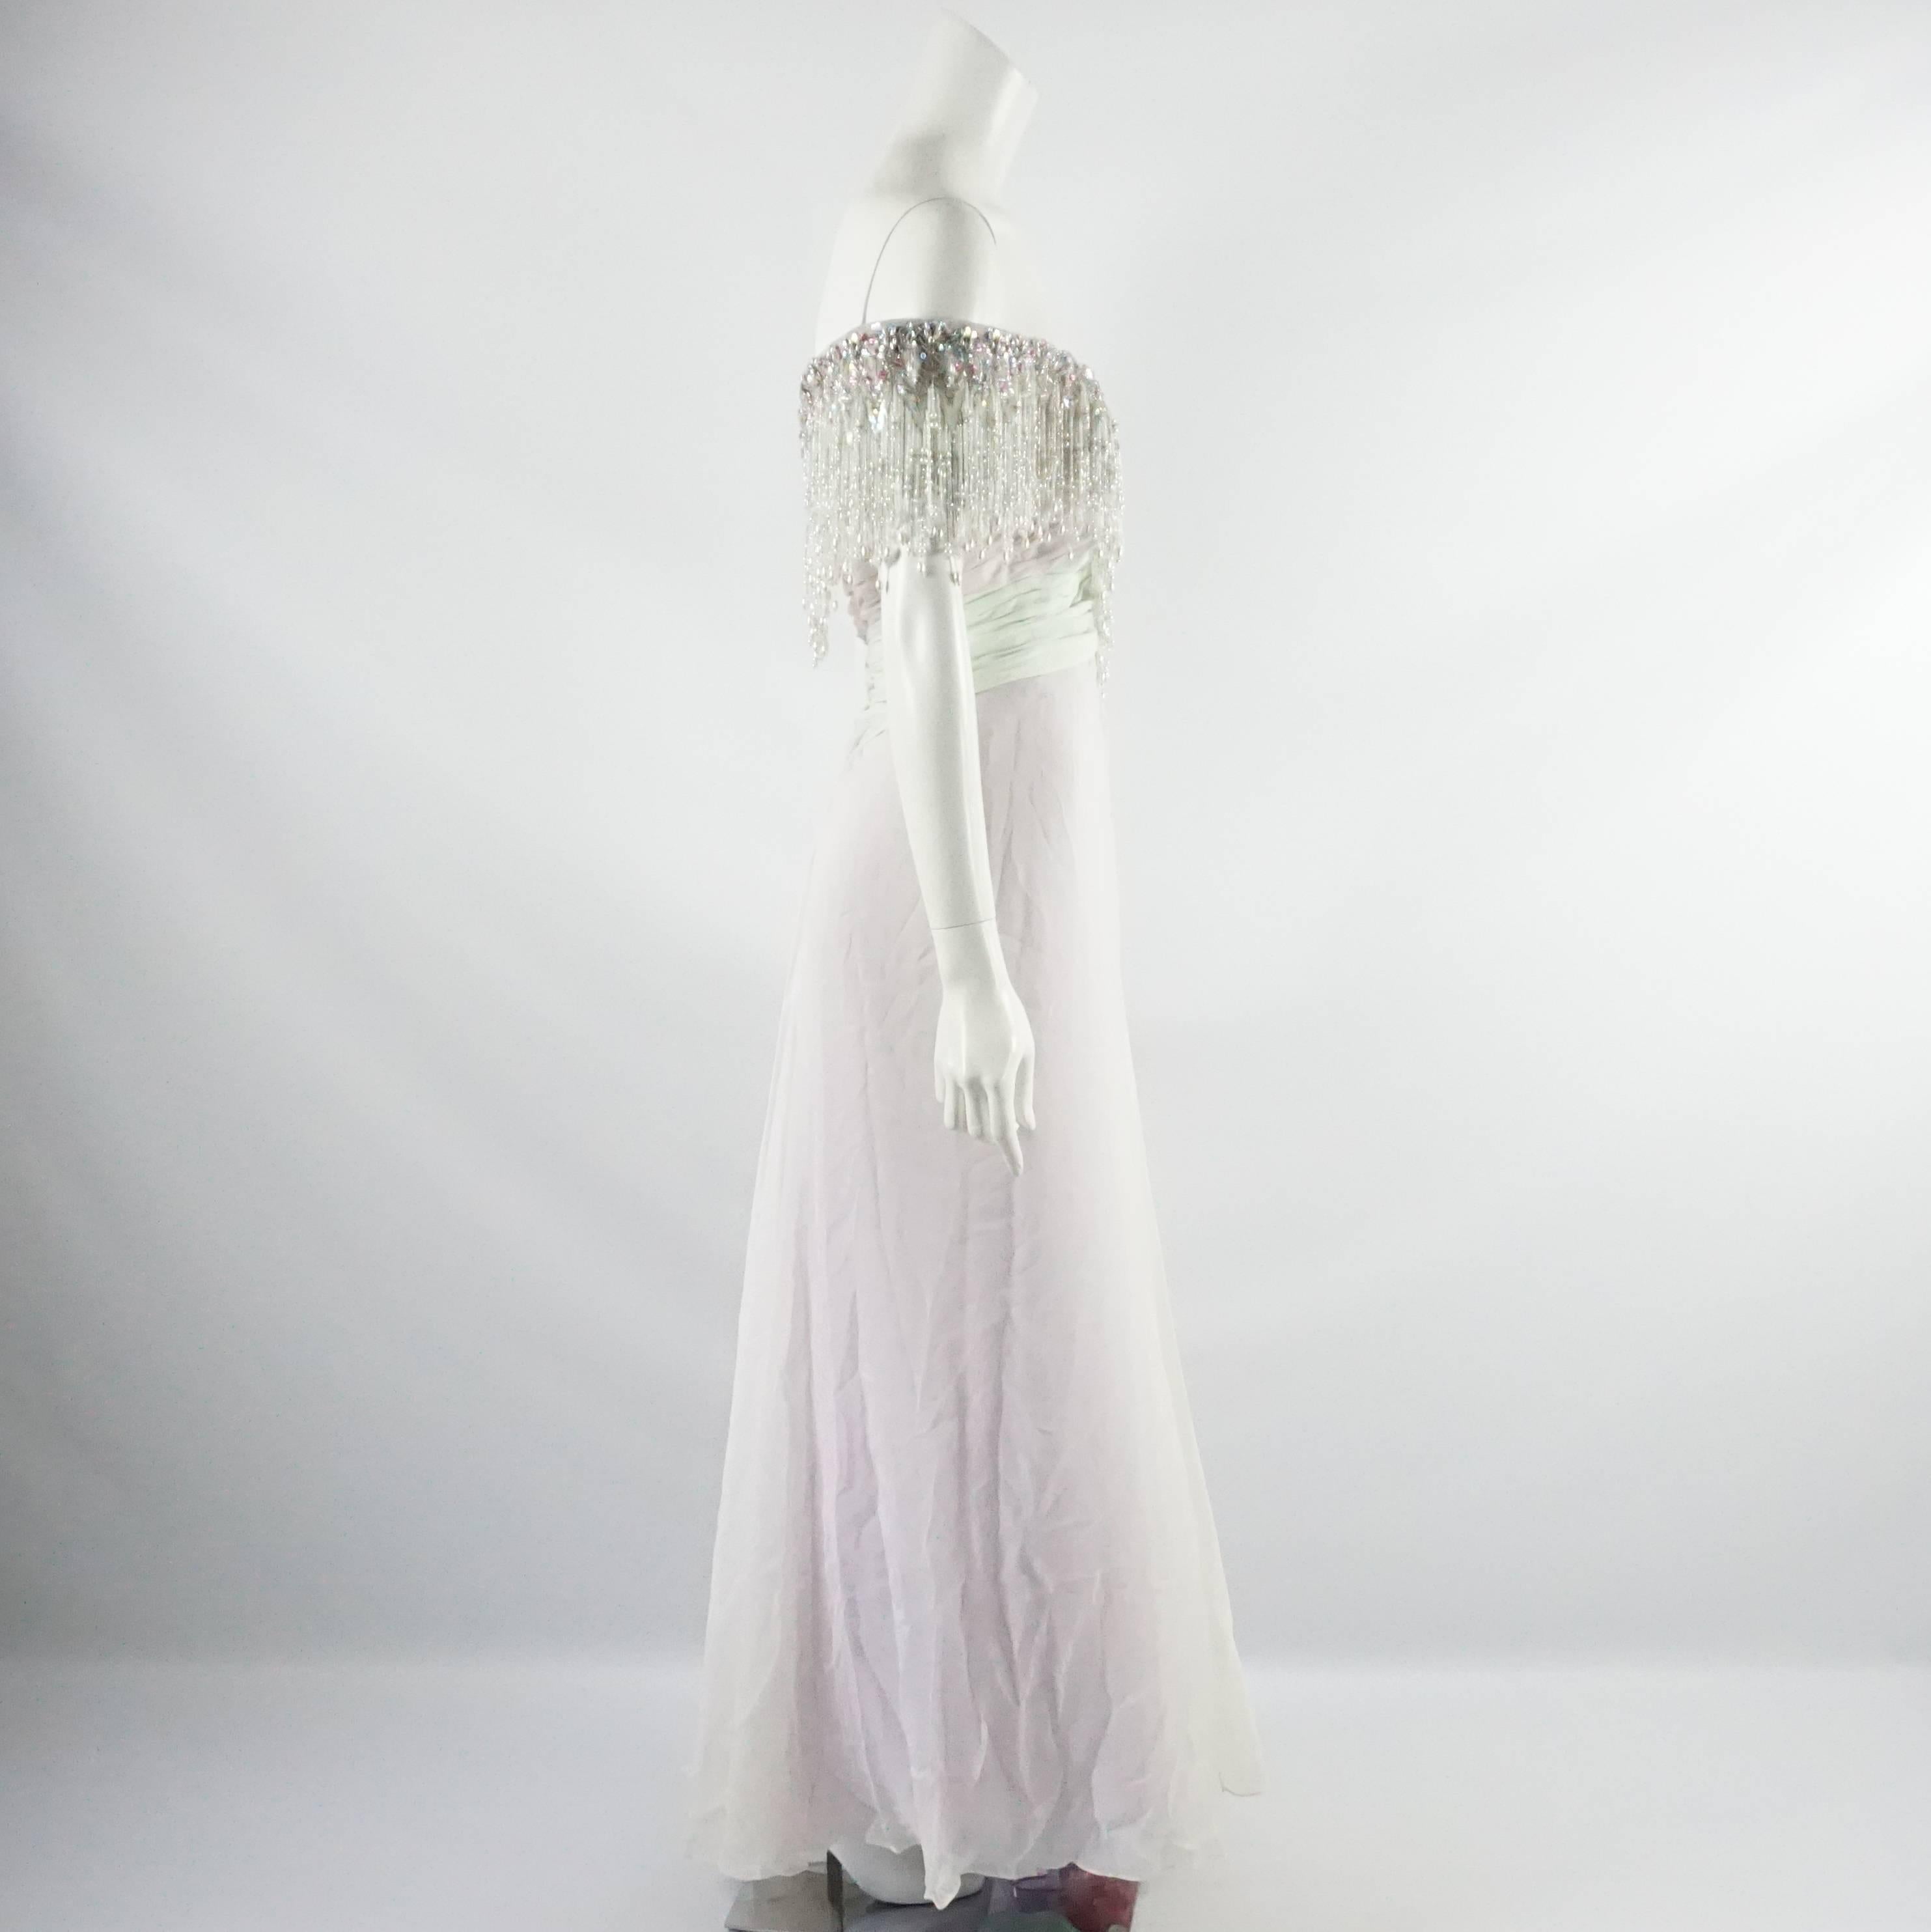 This vintage 1980's Bob Mackie gown has a whimsical feel. This gown is silk chiffon and pastel green, pink, and purple. It has an off-shoulder design, hanging beading, a fitted bodice and a flowing and loose skirt. This gown is in very good vintage